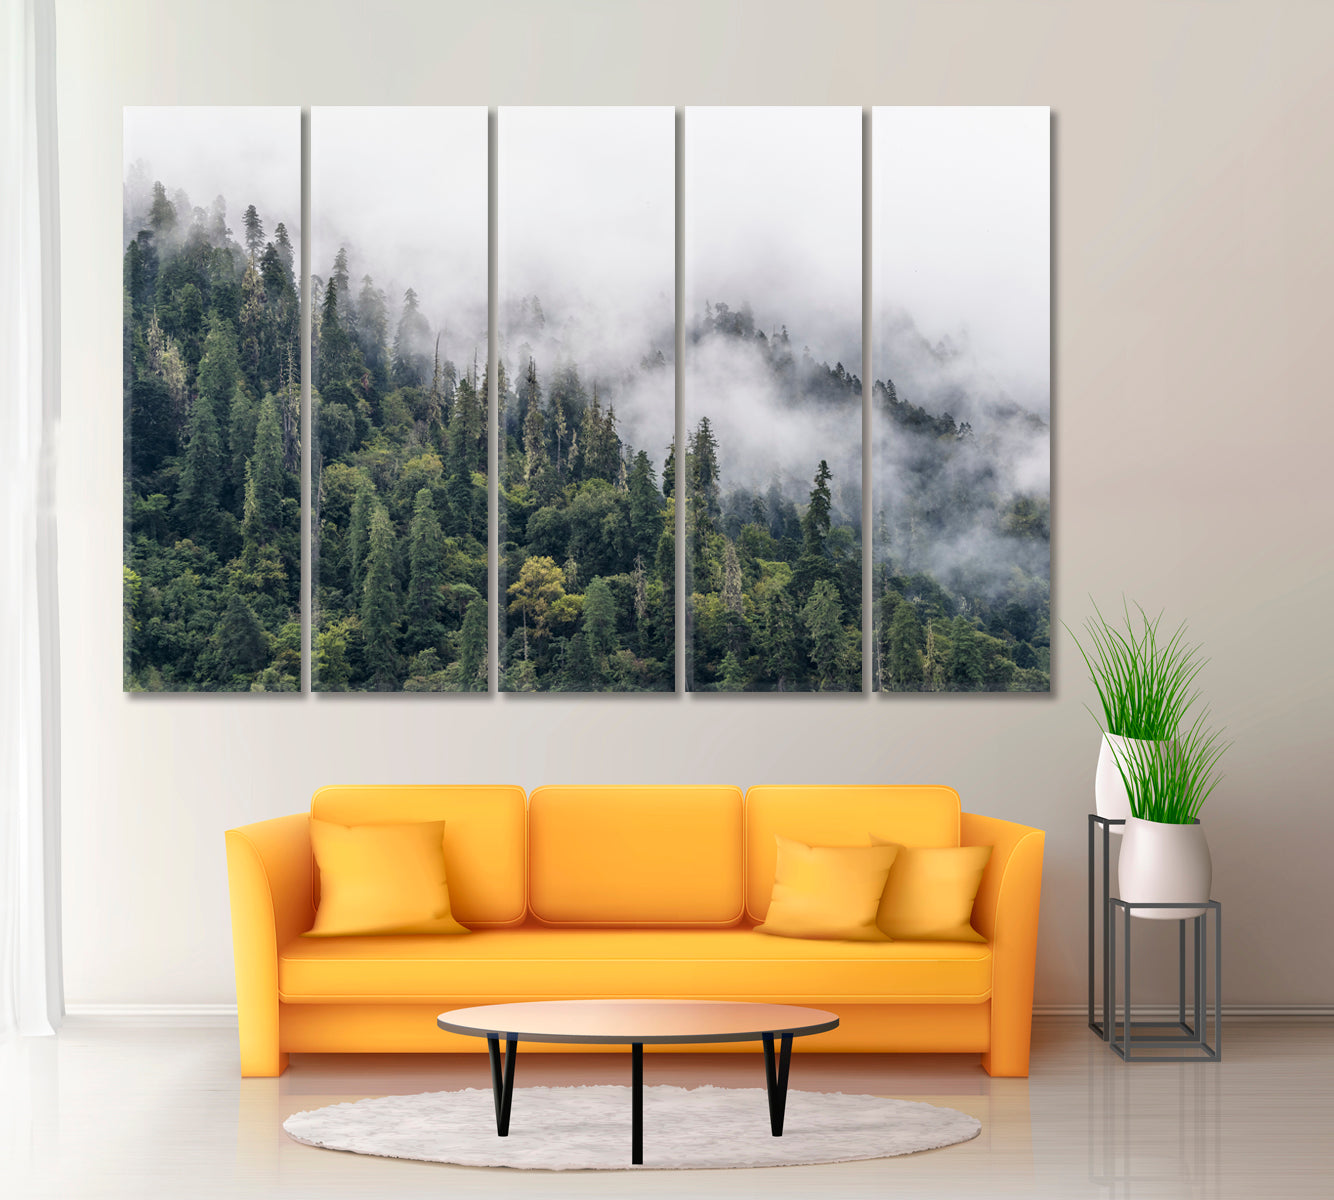 Pine Forest in Fog Tibet Canvas Print ArtLexy 5 Panels 36"x24" inches 